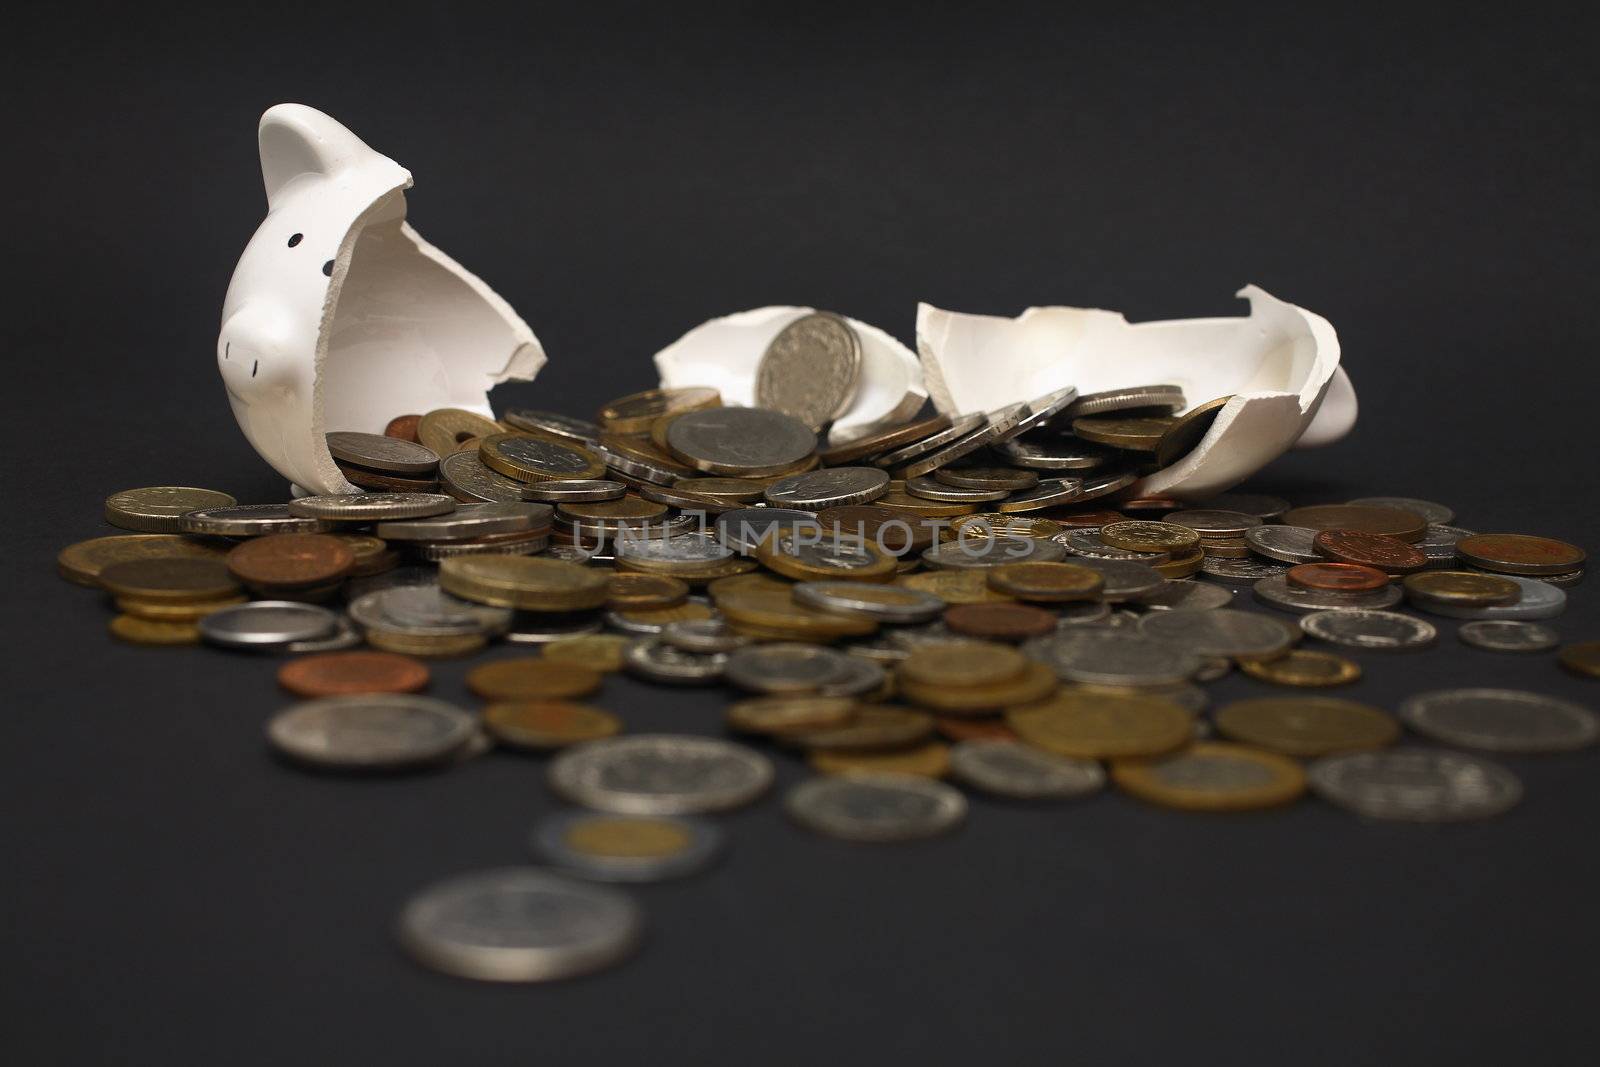 A broken piggy bank isolated on a dark background with loads of coins from around the world.